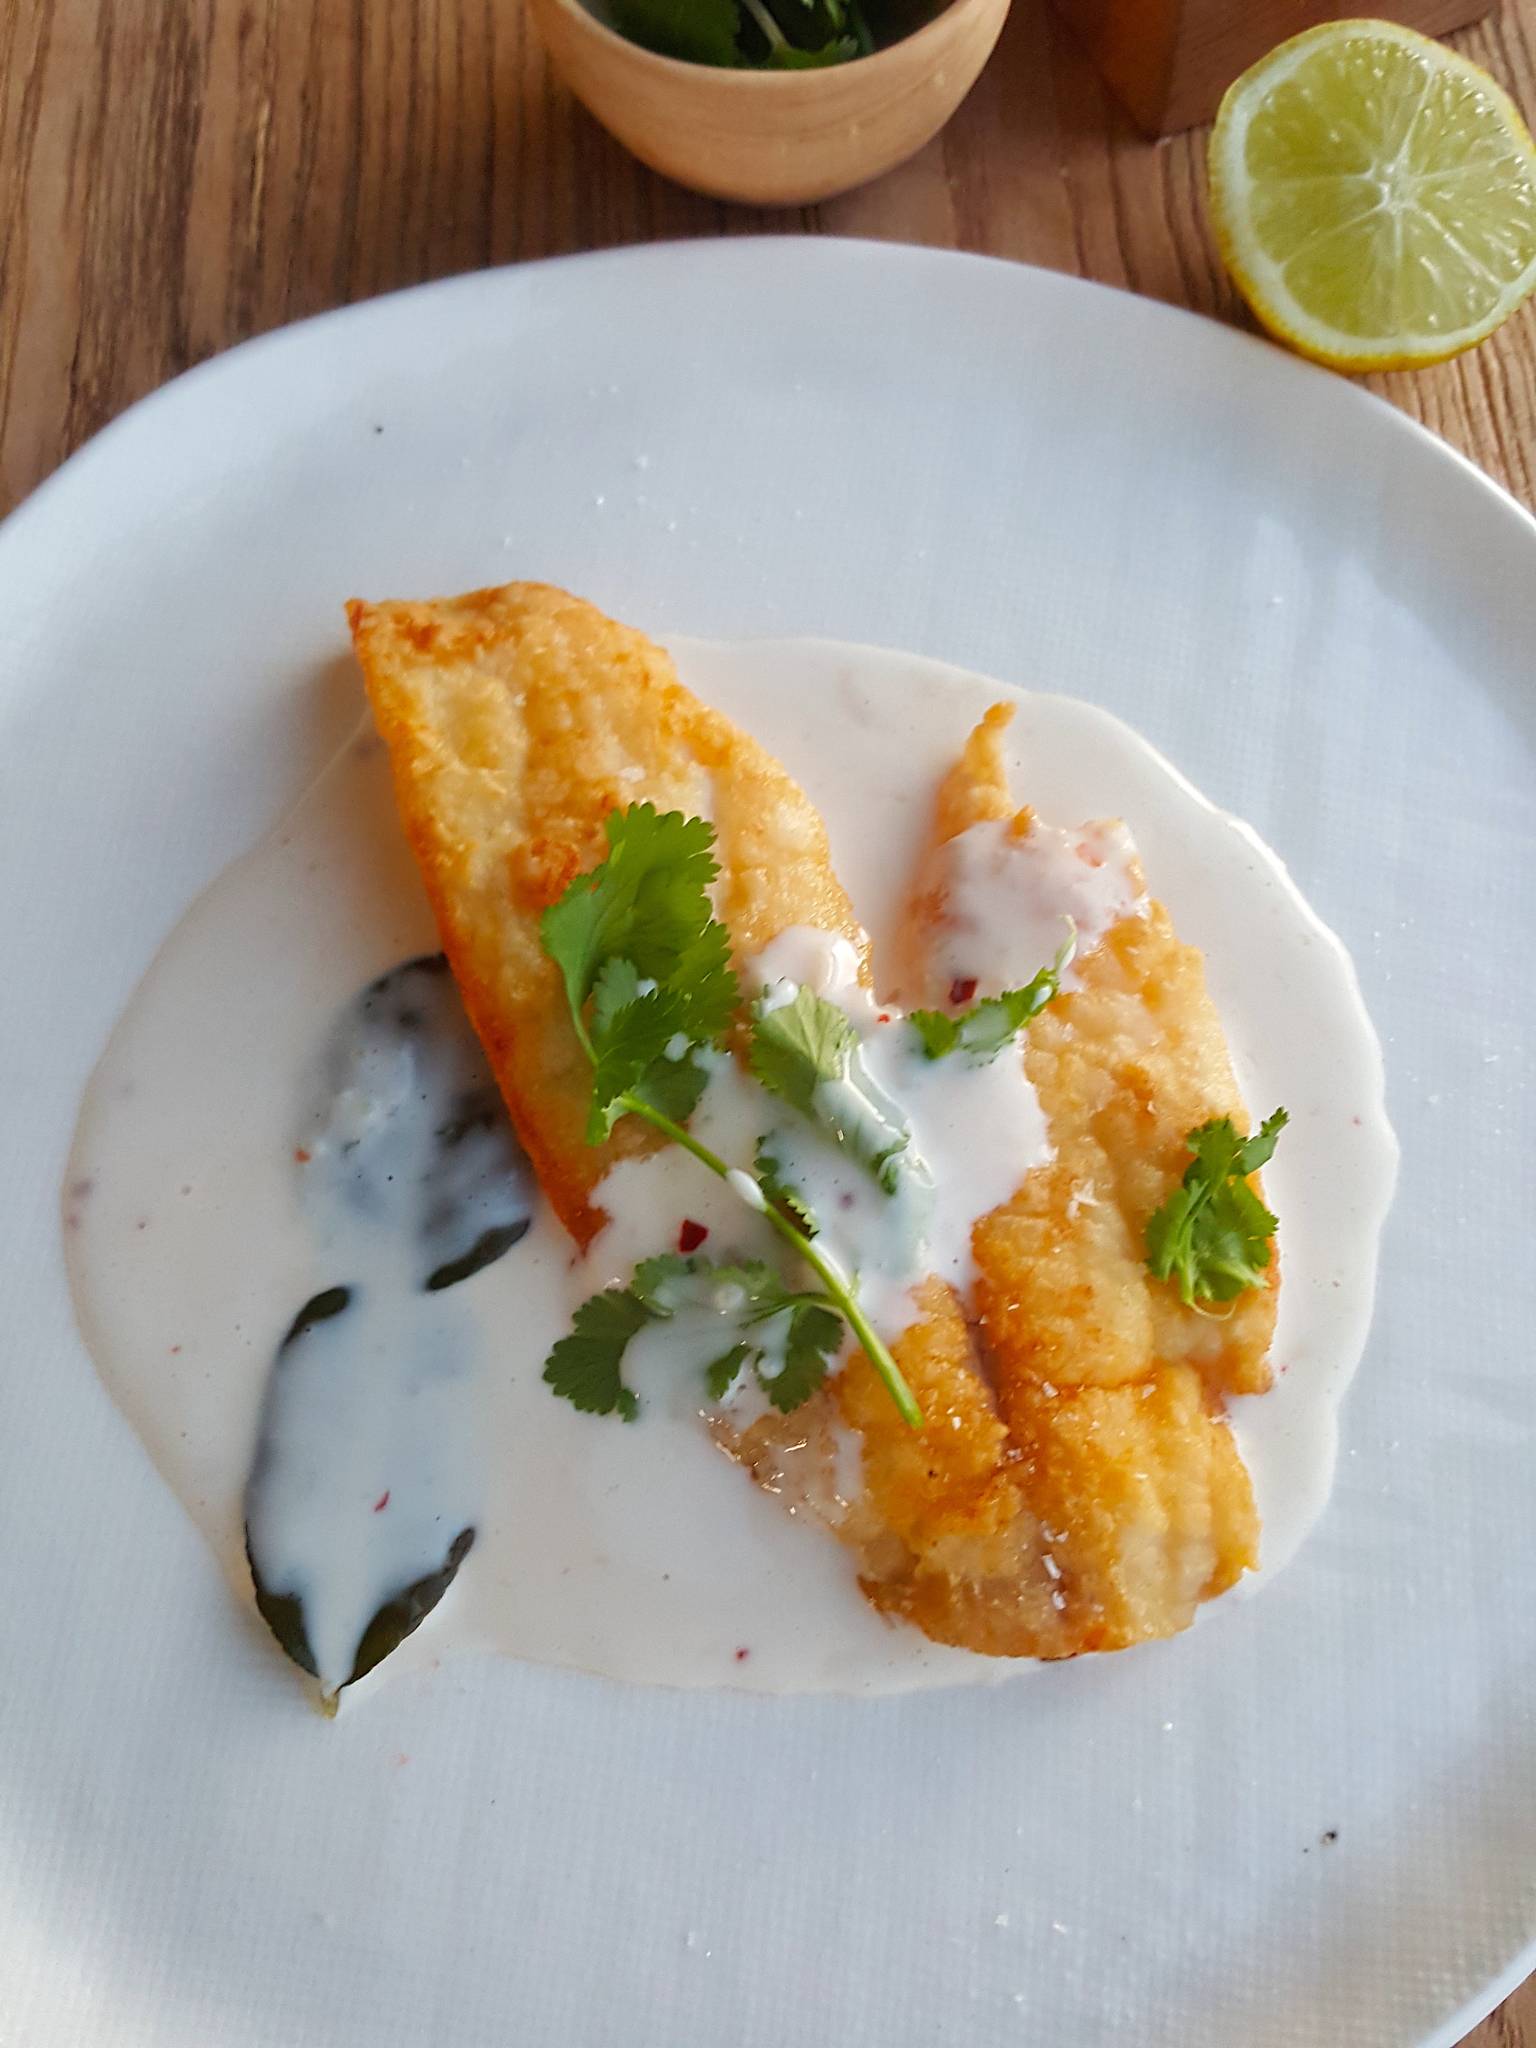 Pan-fried Fish with Coconut Sauce